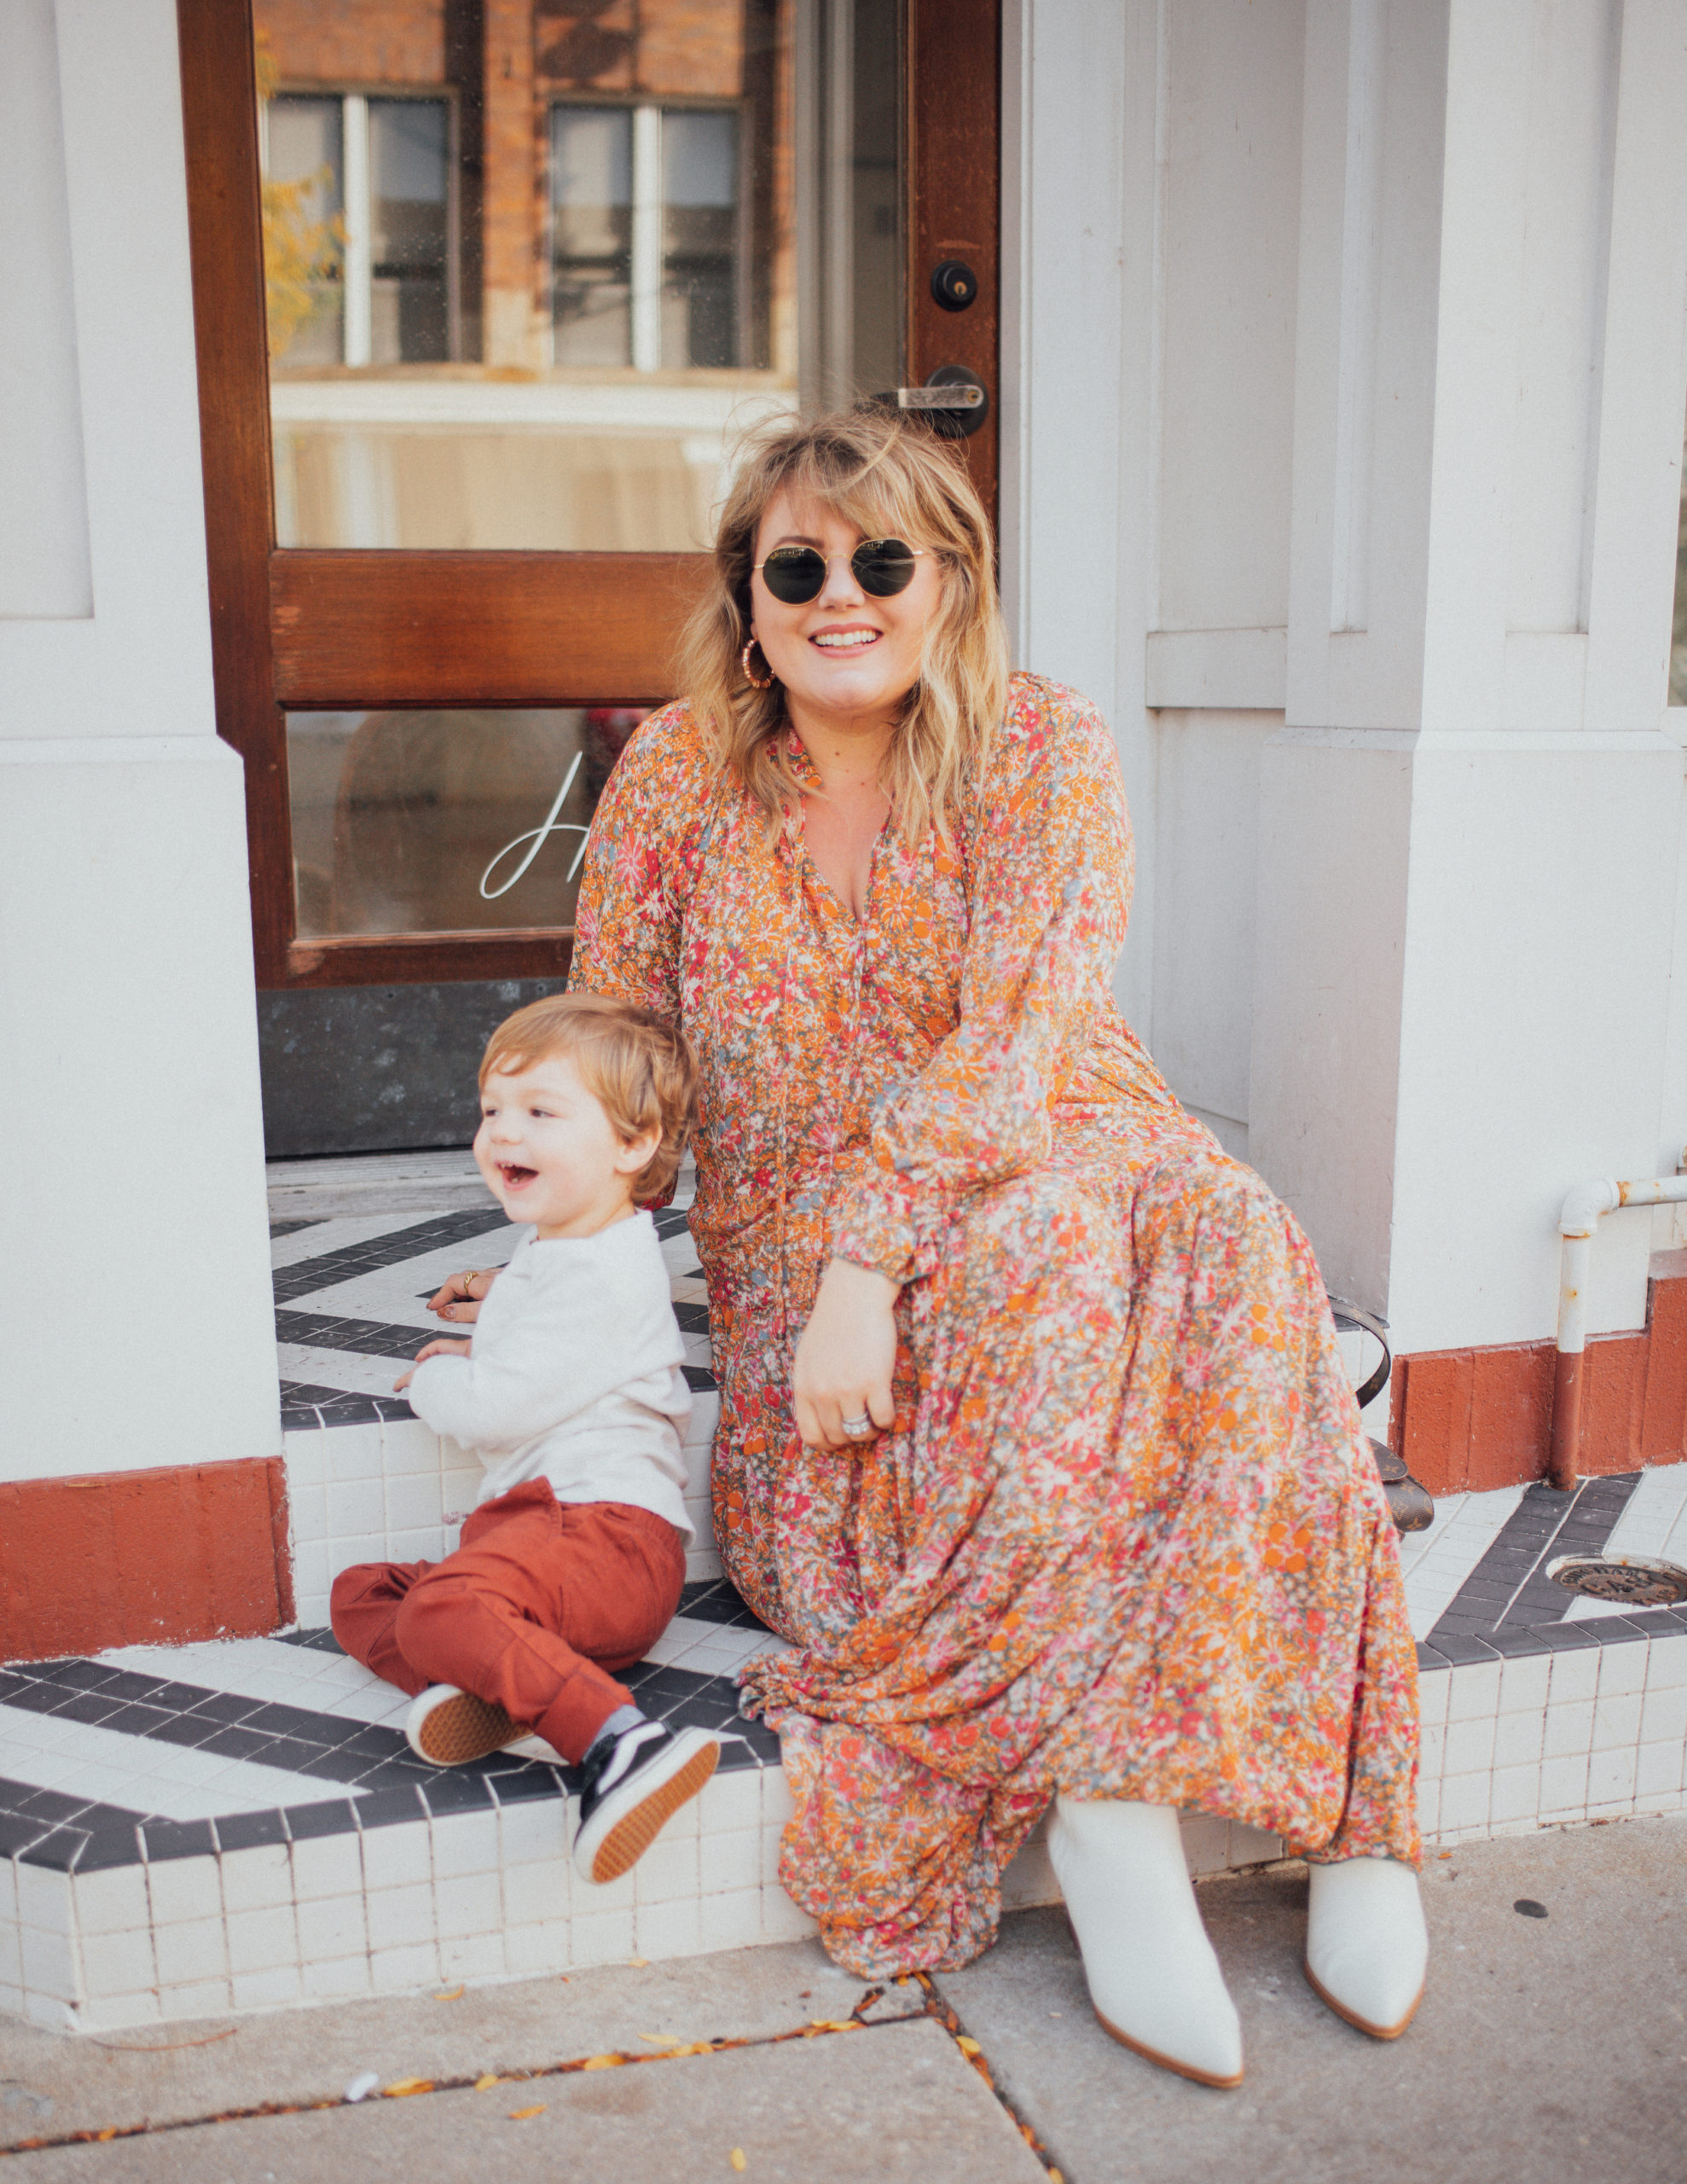 Sharing a fall boho dress from Free People, the Feeling Groovy Maxi dress comes in XS-XL but runs and fits plus sizes.